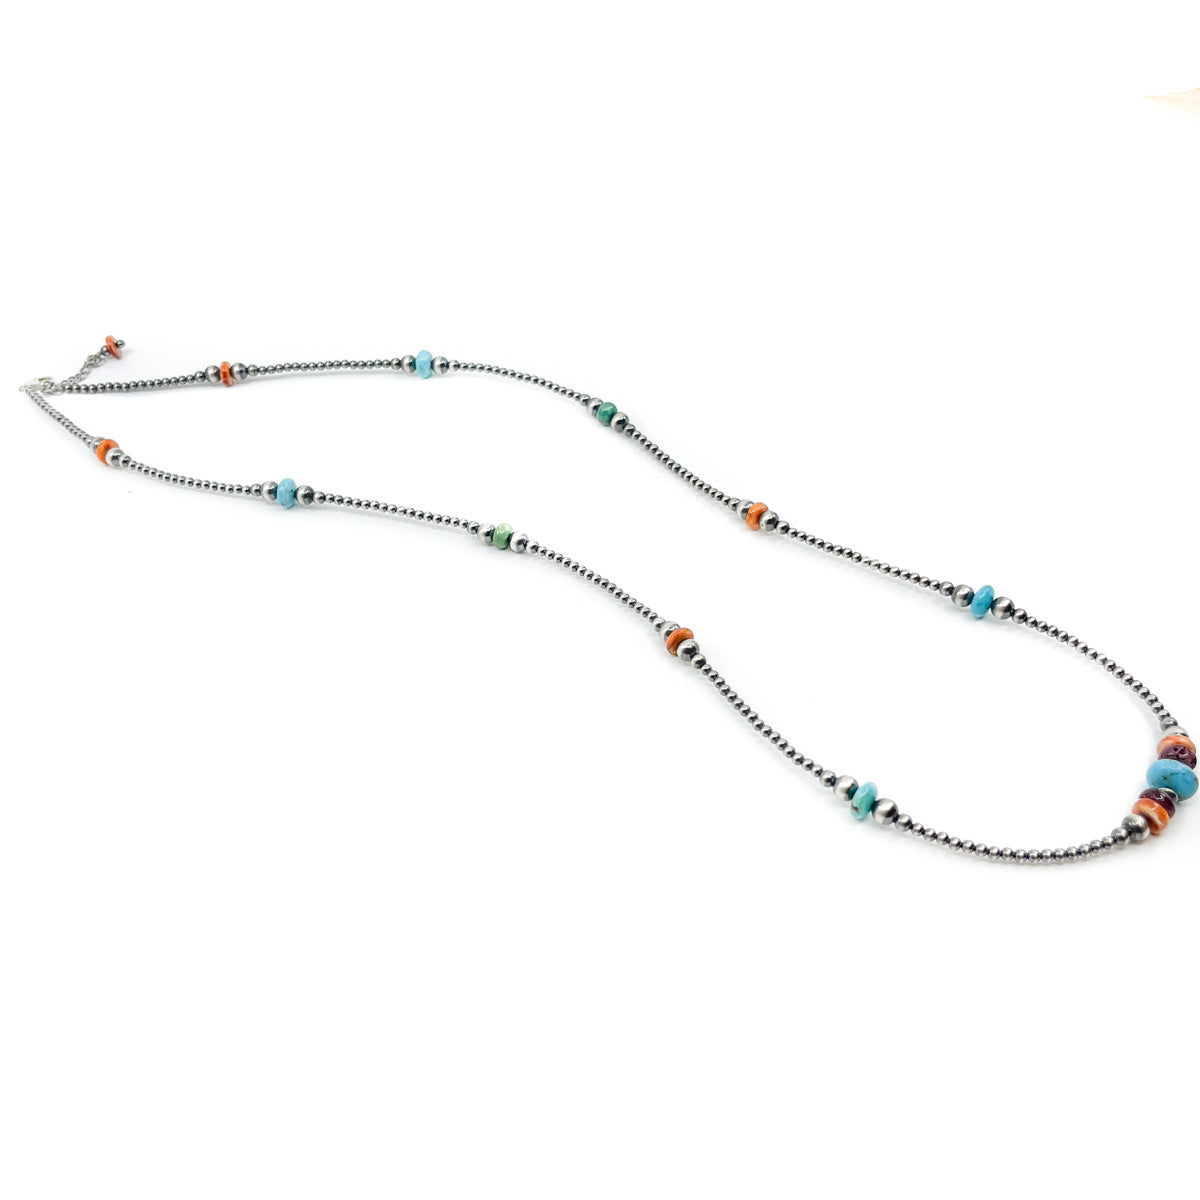 Beautiful Silver Bead and Heishe Necklace